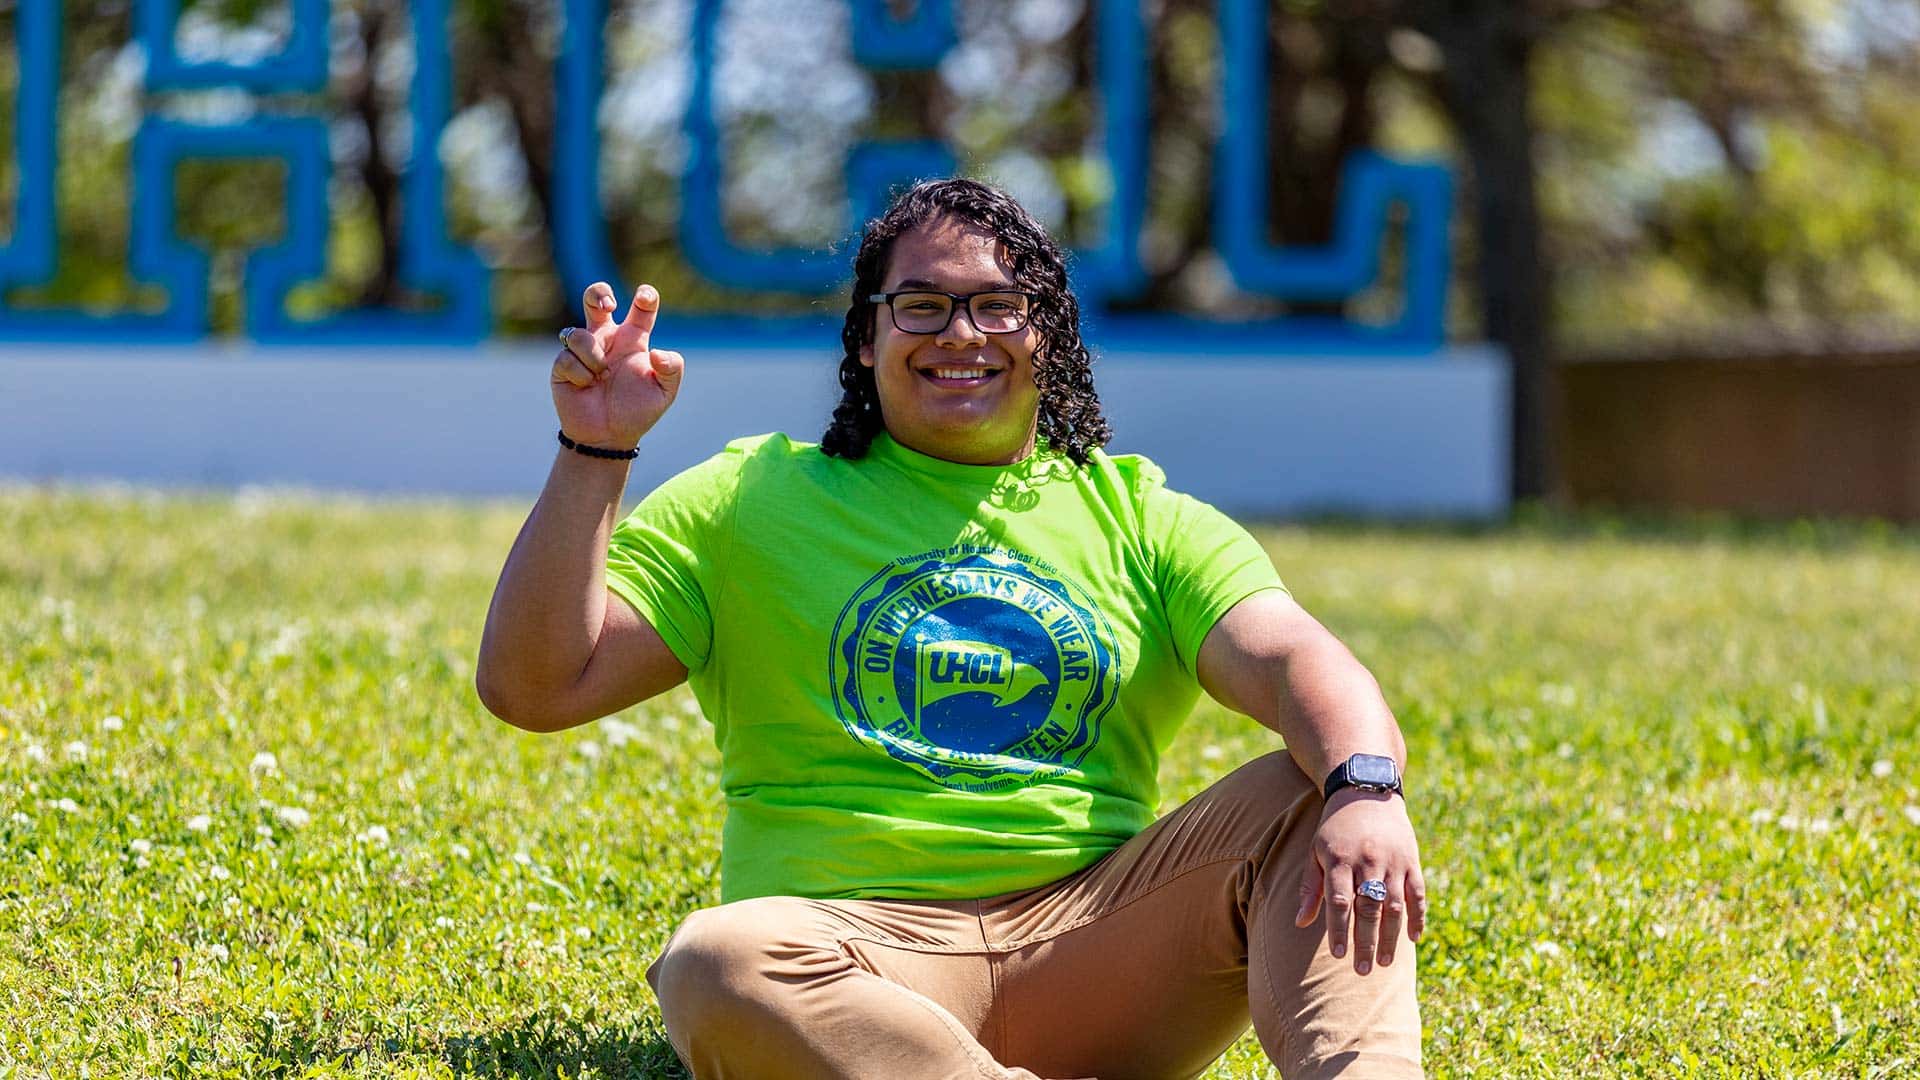 A student with the UHCL letters, hand raise in "The Claw"